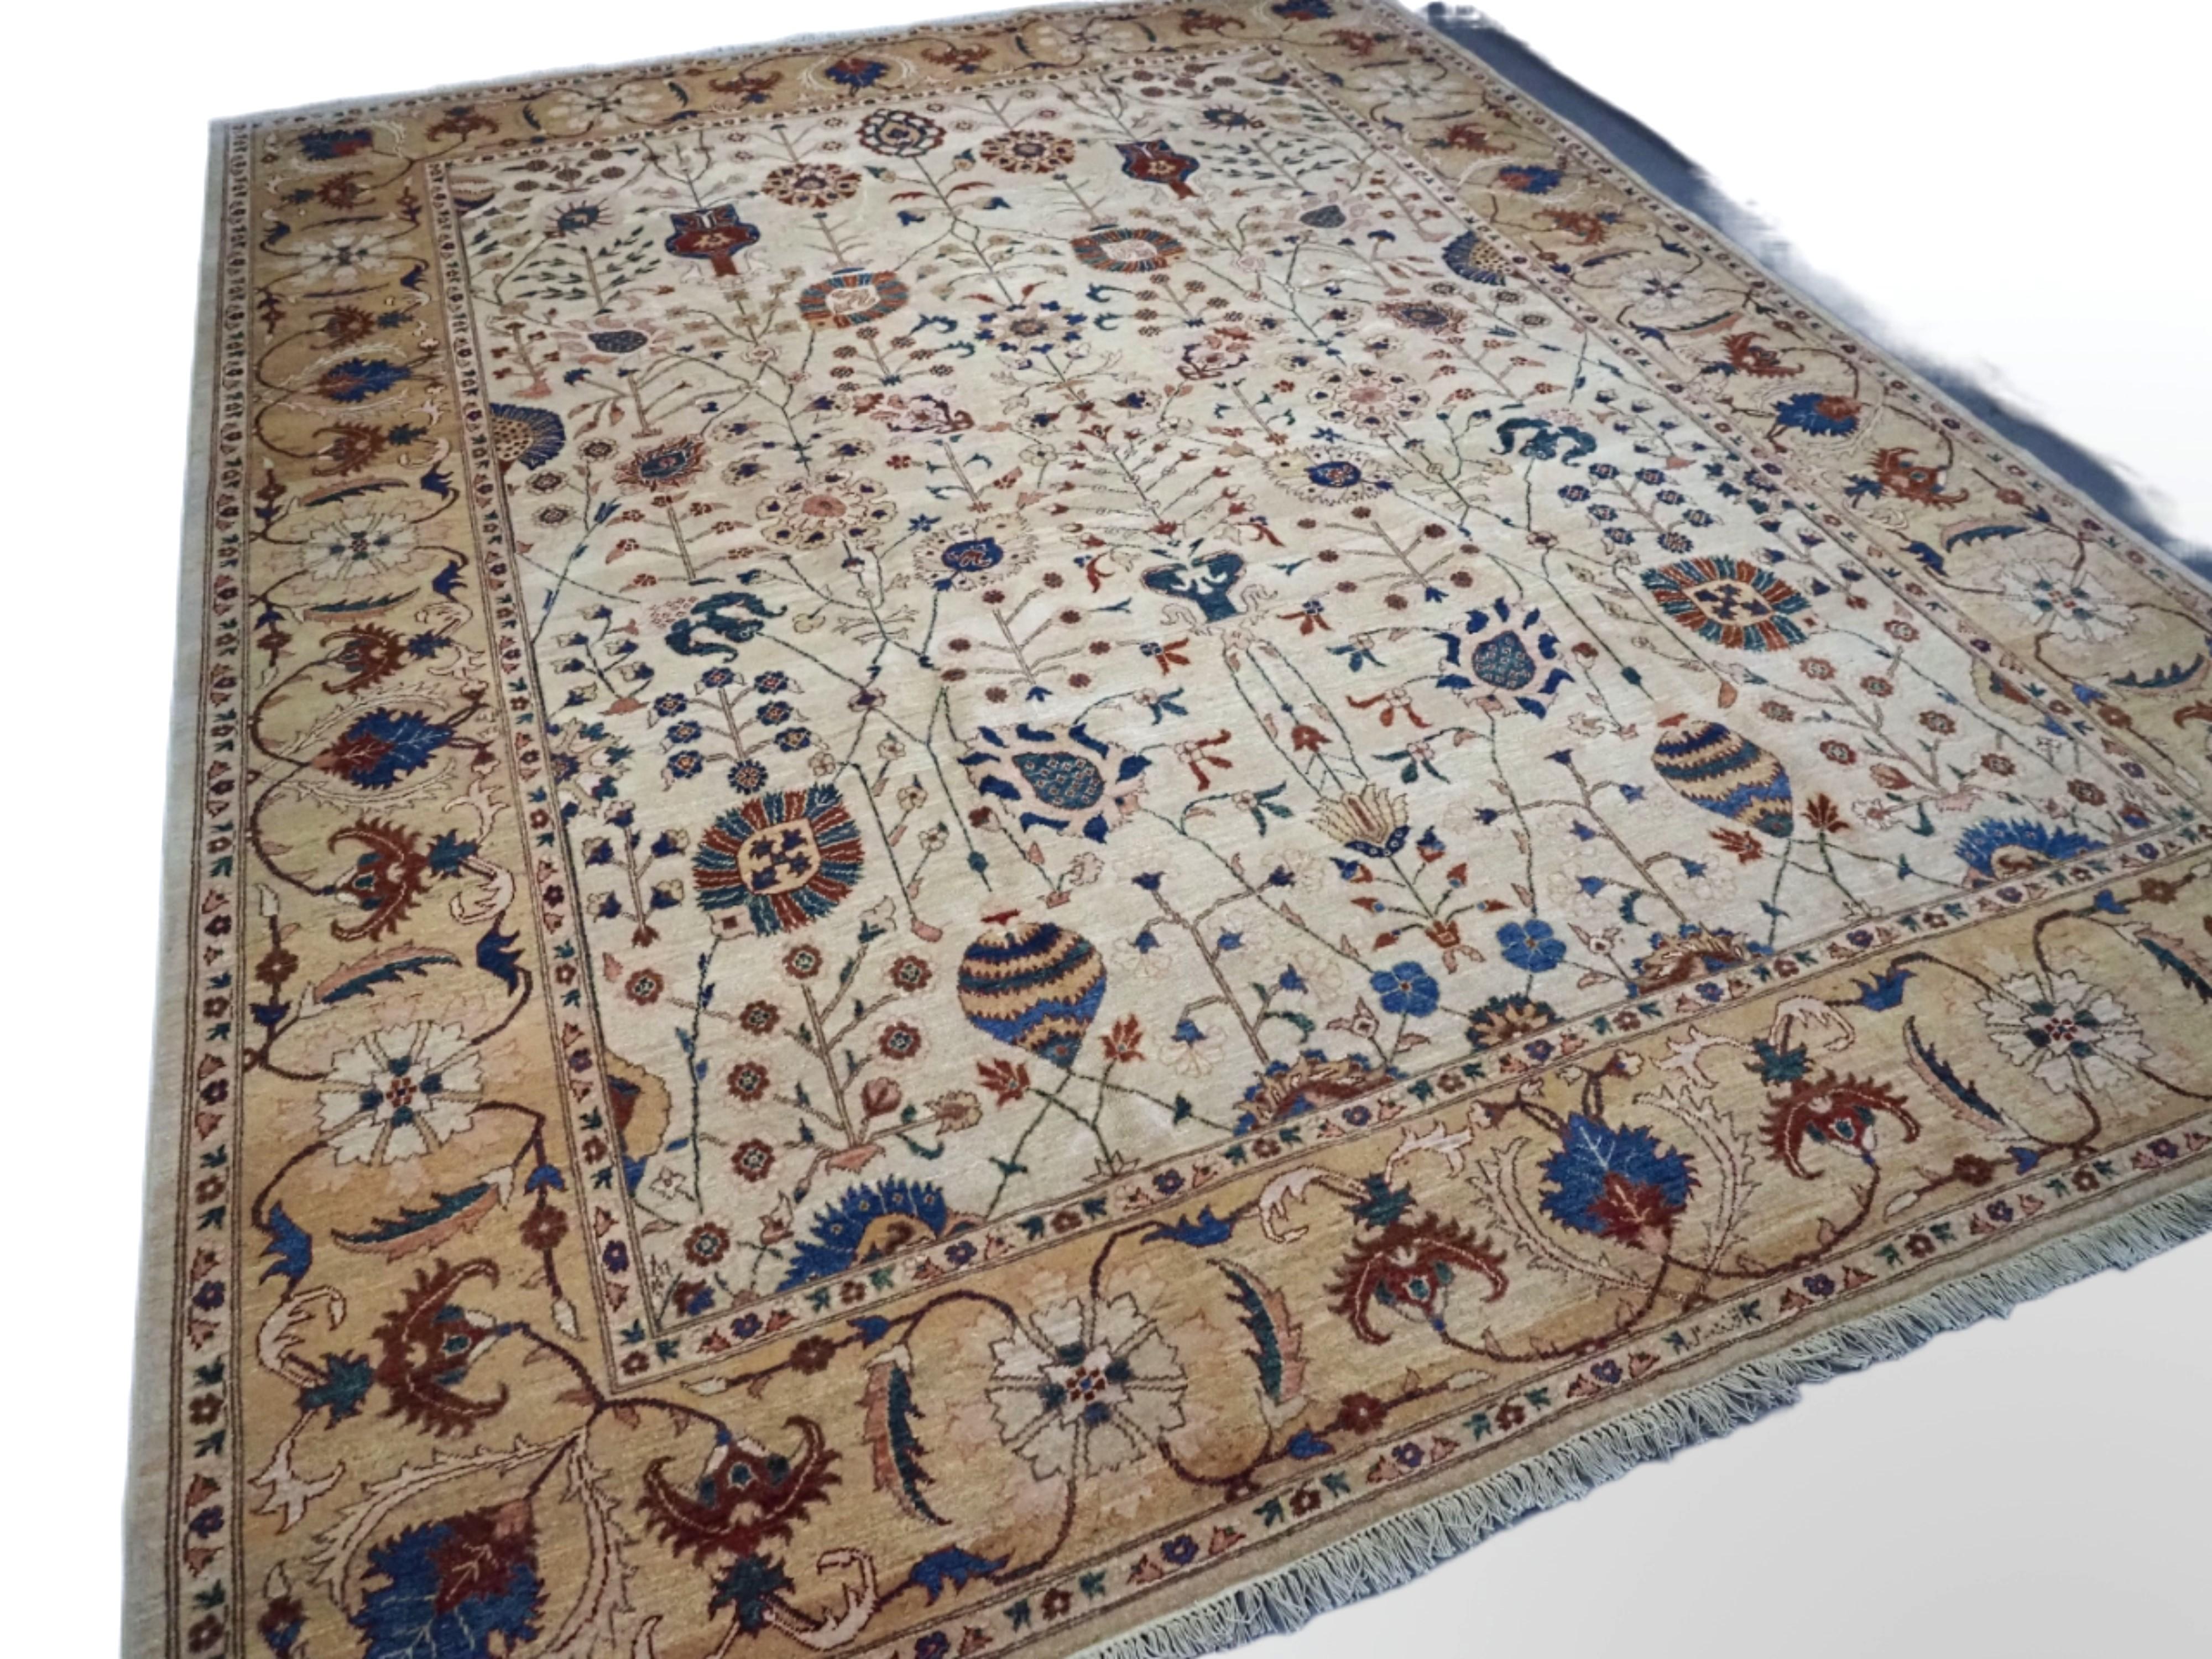 
Size: 11ft 6in x 9ft 0in. (350 x 274cm)

An excellent example of a Ziegler design carpet of recent production hand knotted in Afghanistan.

About 10 years old.

Pleasing Persian floral vase design inspired by 17th century Kirman vase carpets. The